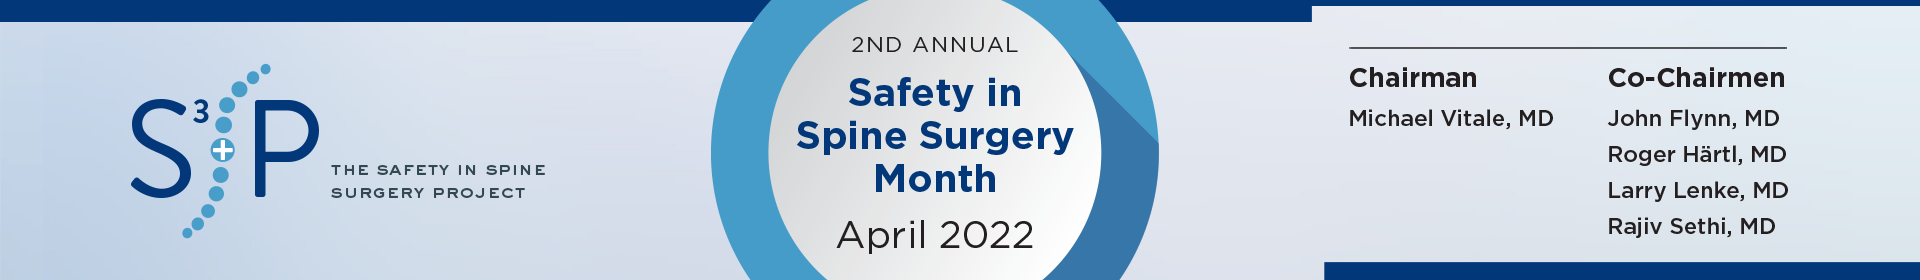 Safety in Spine Surgery Event Banner